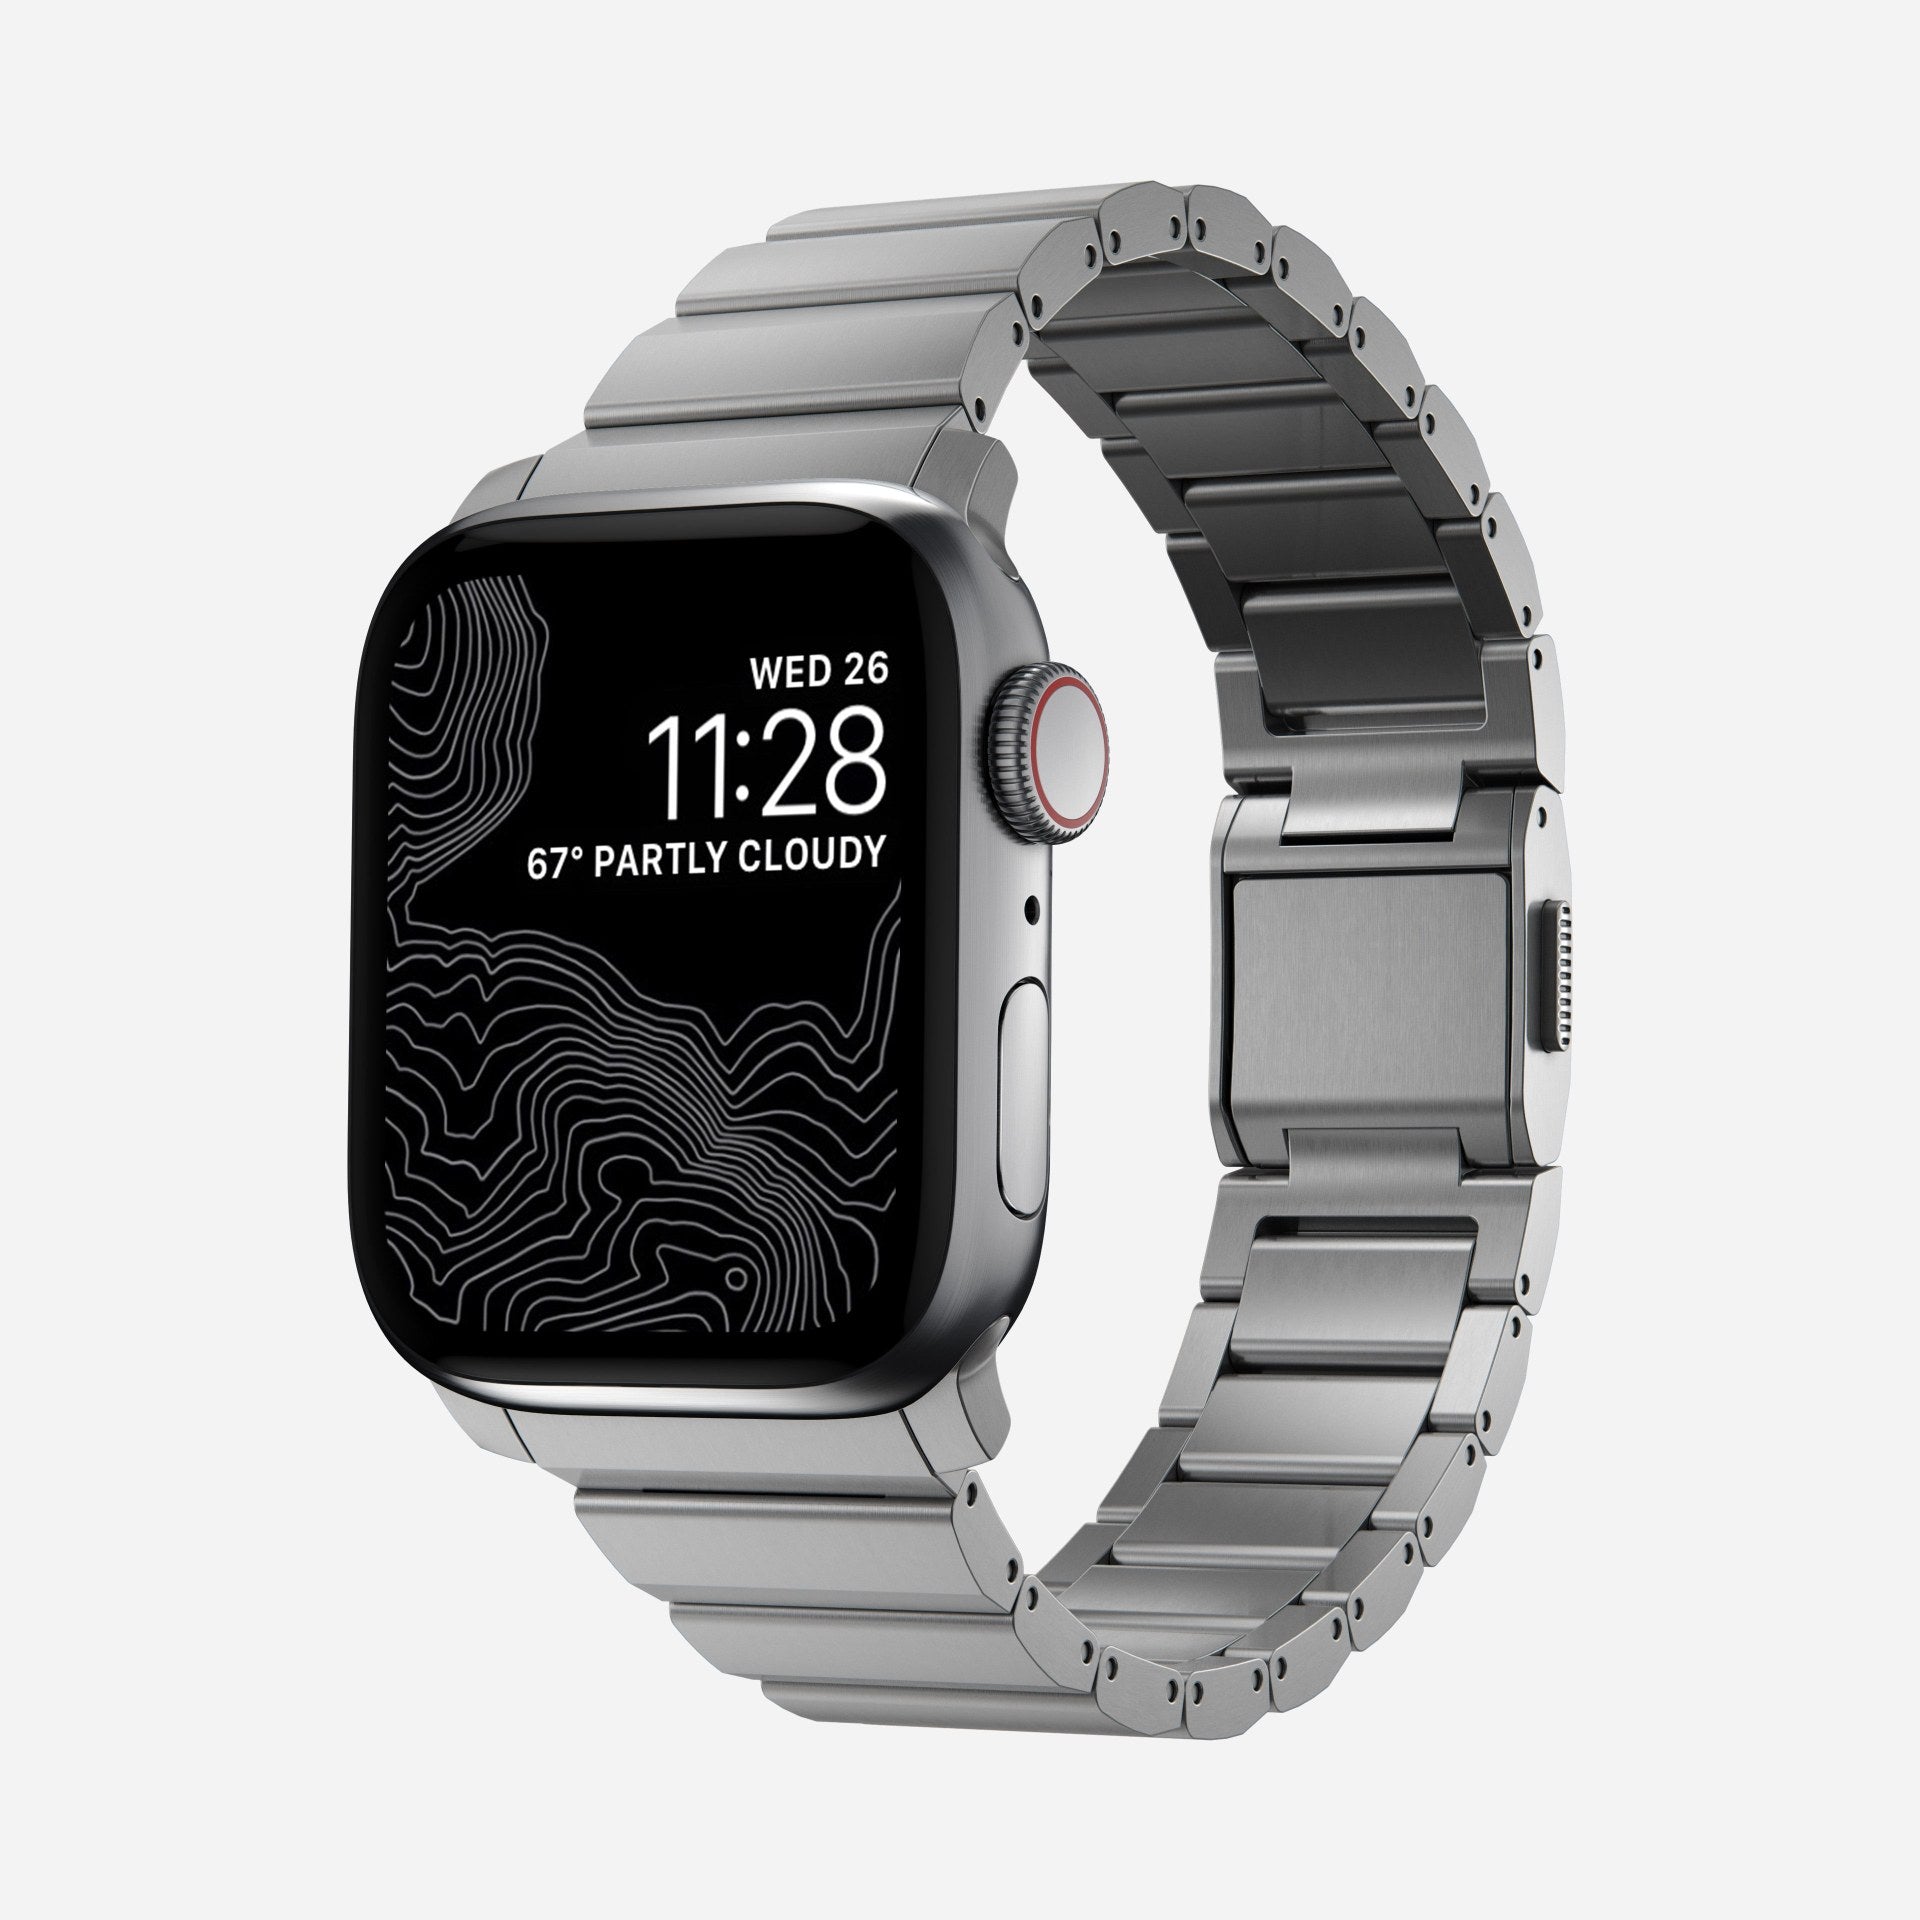 Nomad Titanium Band for Apple Watch - Storming Gravity